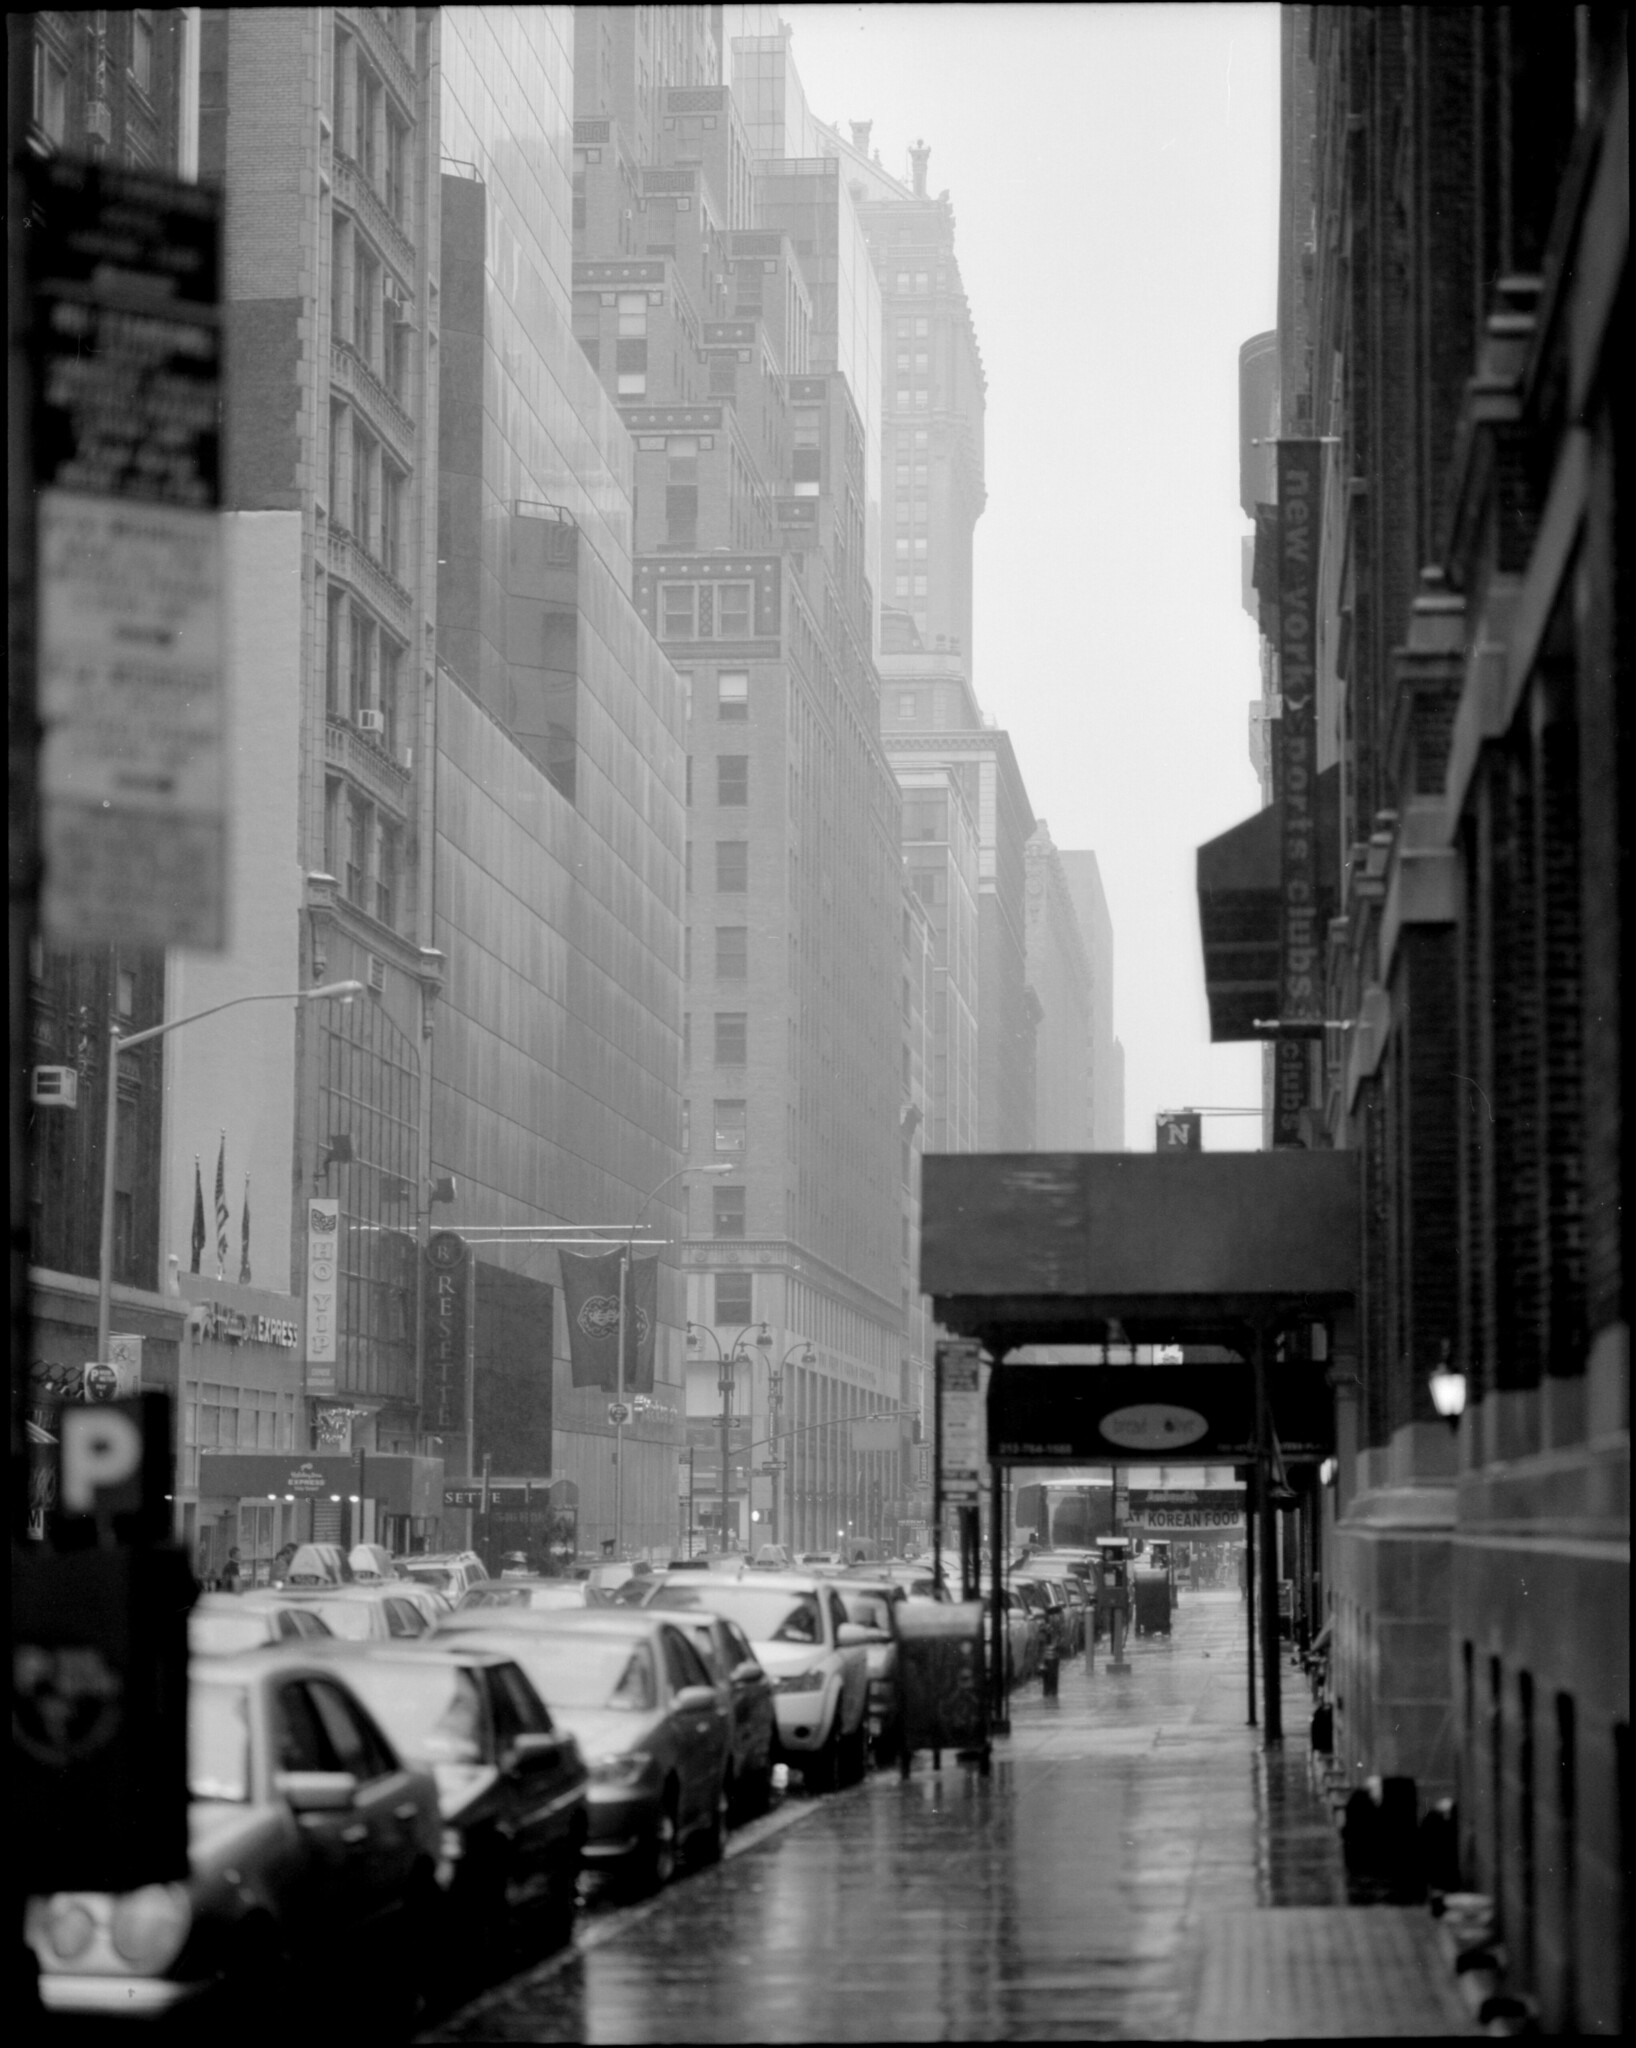 45th Street in the rain on Flickr